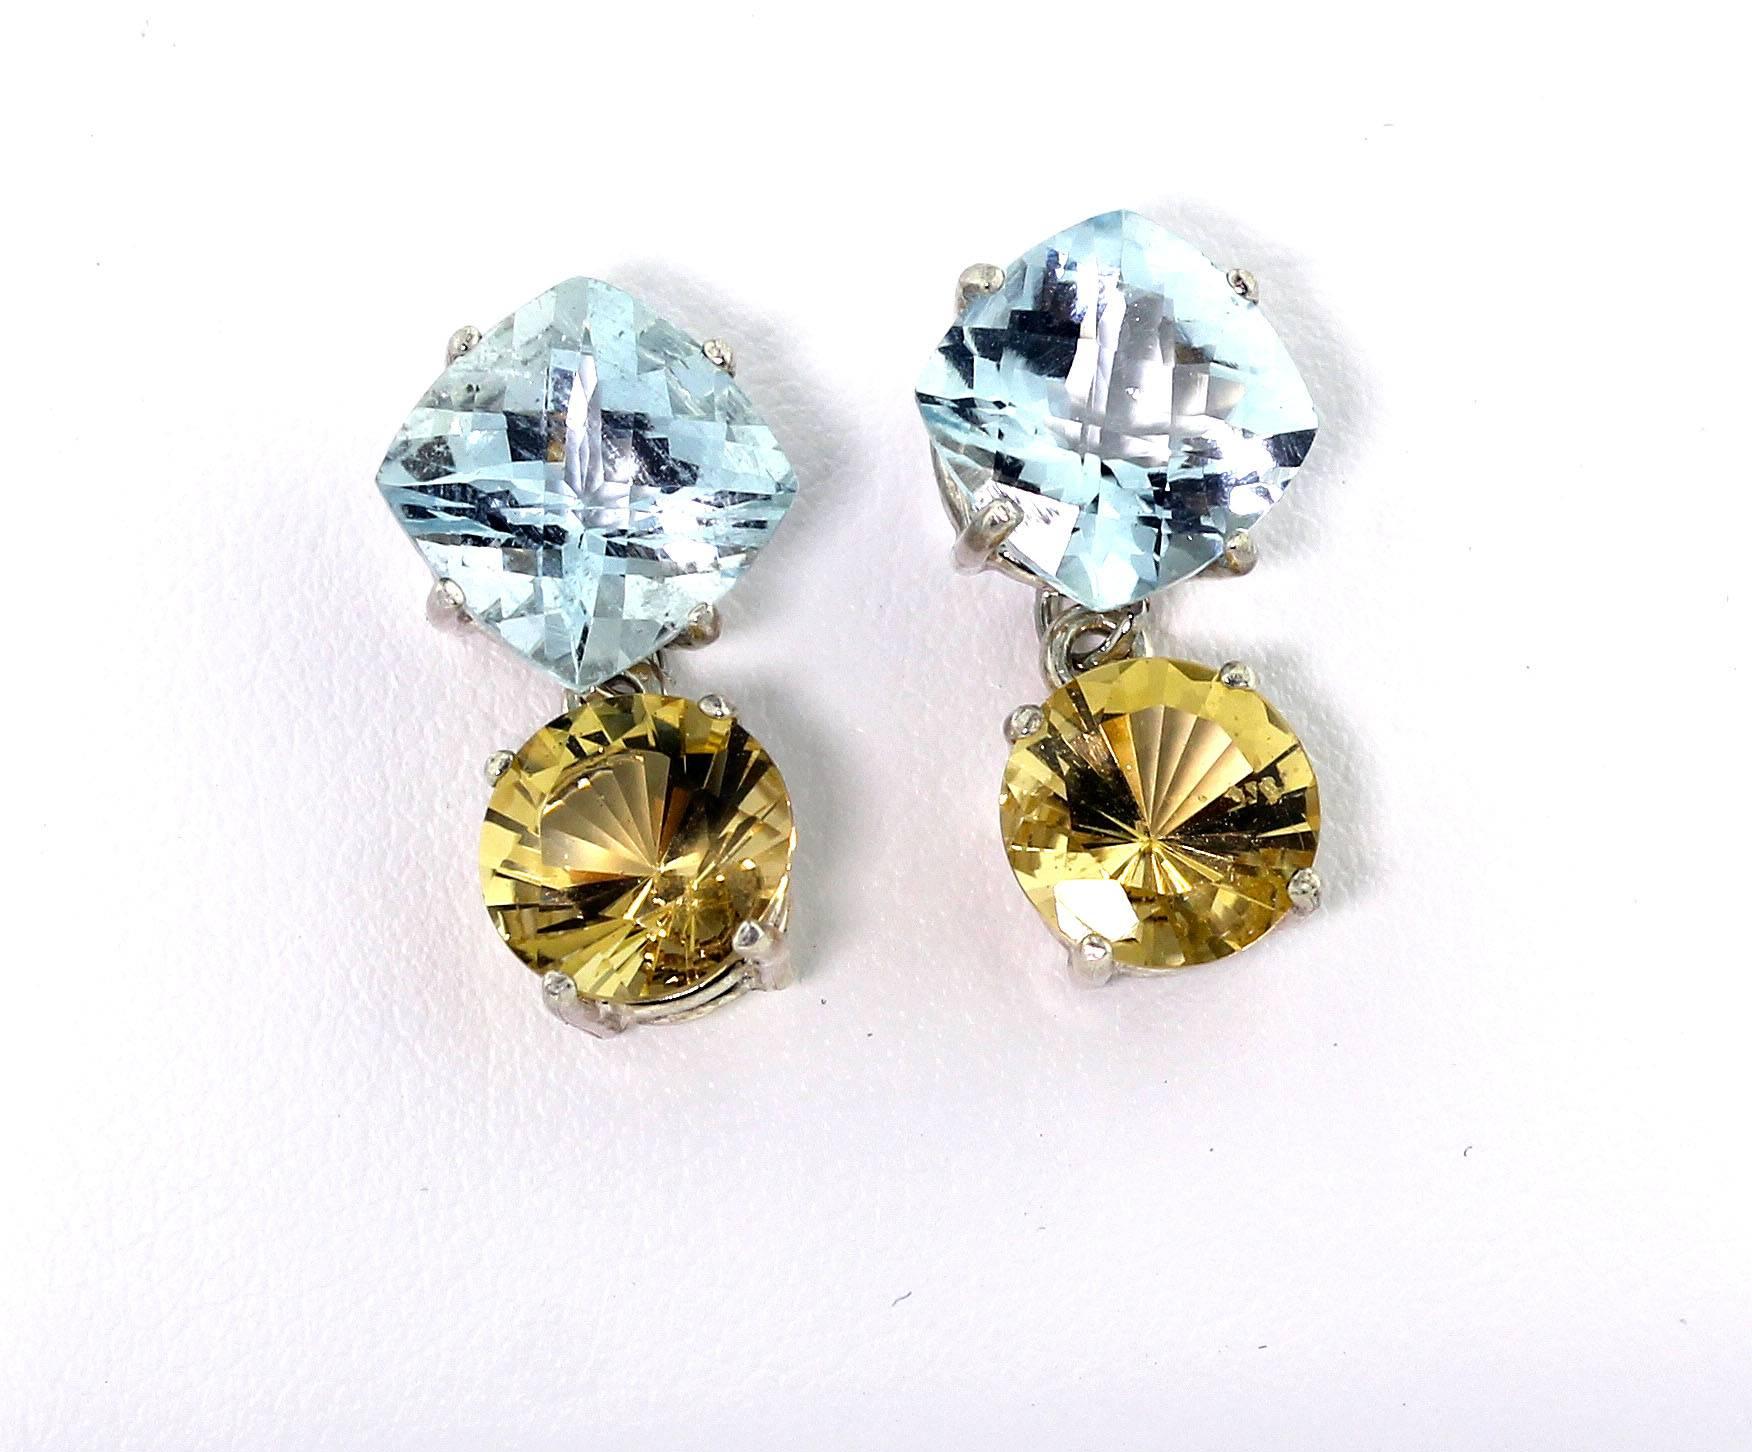 Glittering checkerboard gem cut blue Aquamarines (10 mm x 10 mm) top these swinging brilliant round gem cut yellow Beryls (9 mm) in sterling silver stud earrings.  They hang approximately 7/8 inches long.